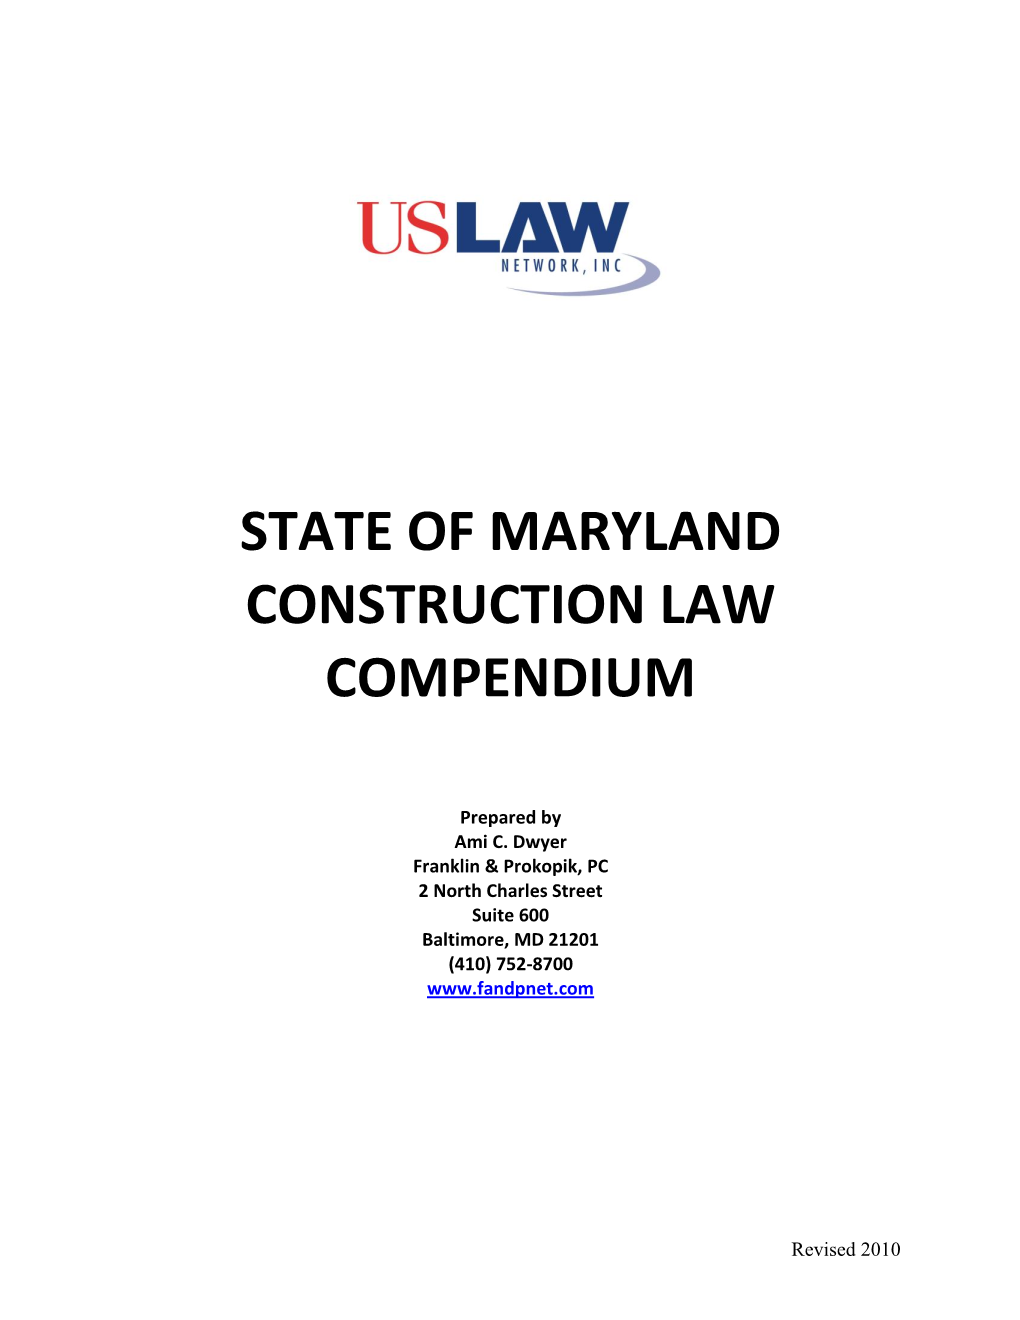 State of Maryland Construction Law Compendium